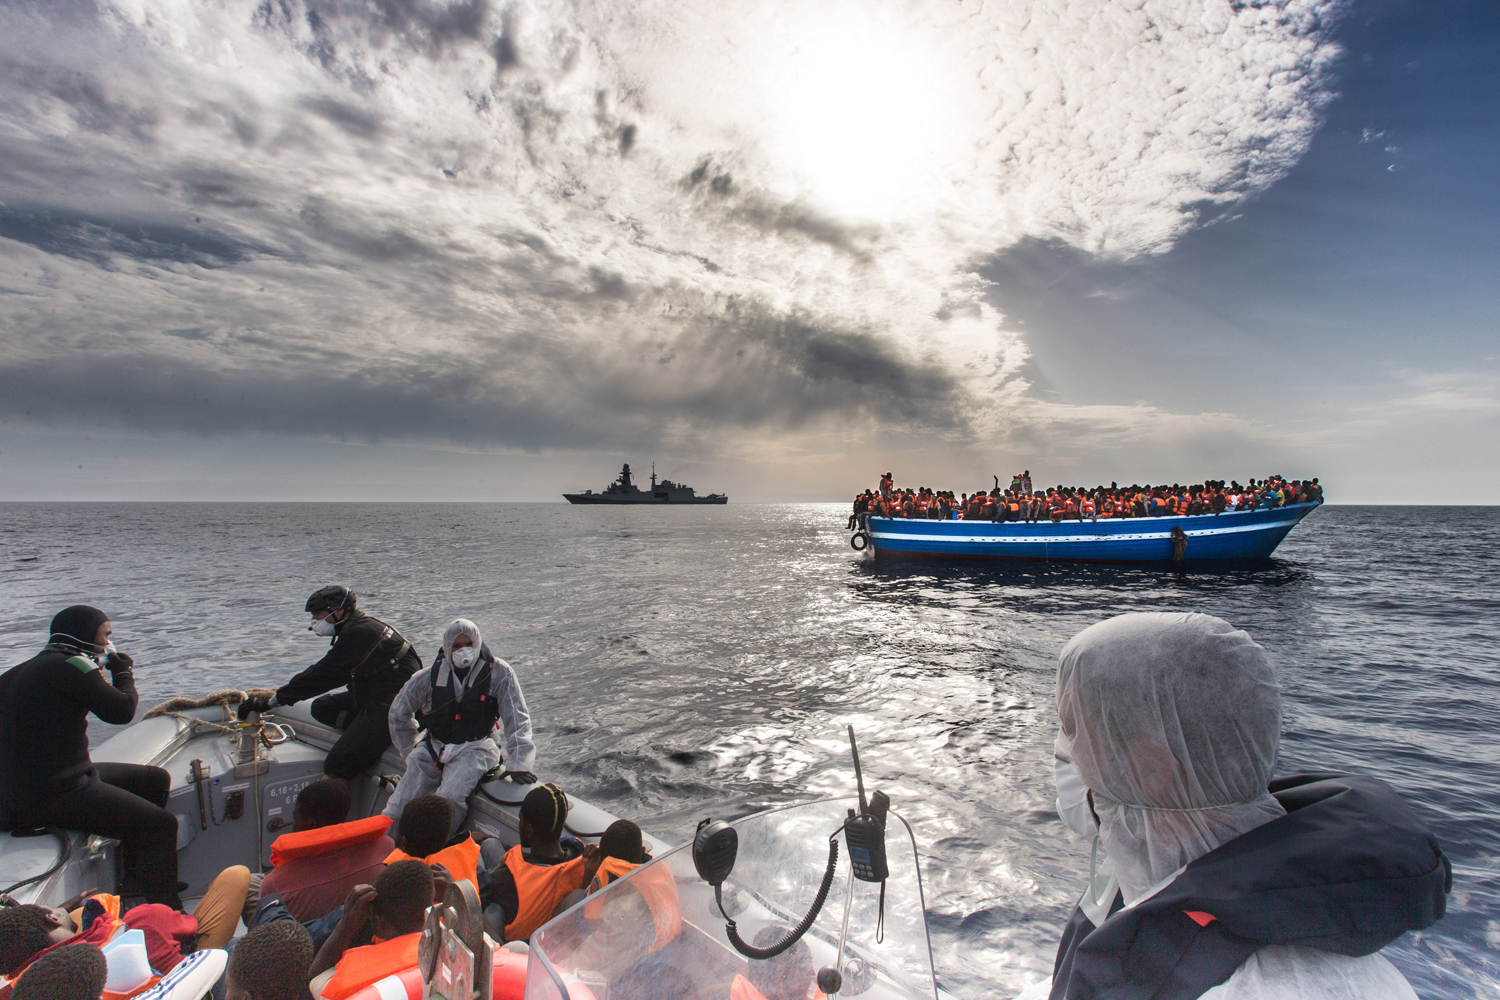 Refugees rescued off a boat and carried onto an Italian navy ship on the Mediterranean Sea, June 7.